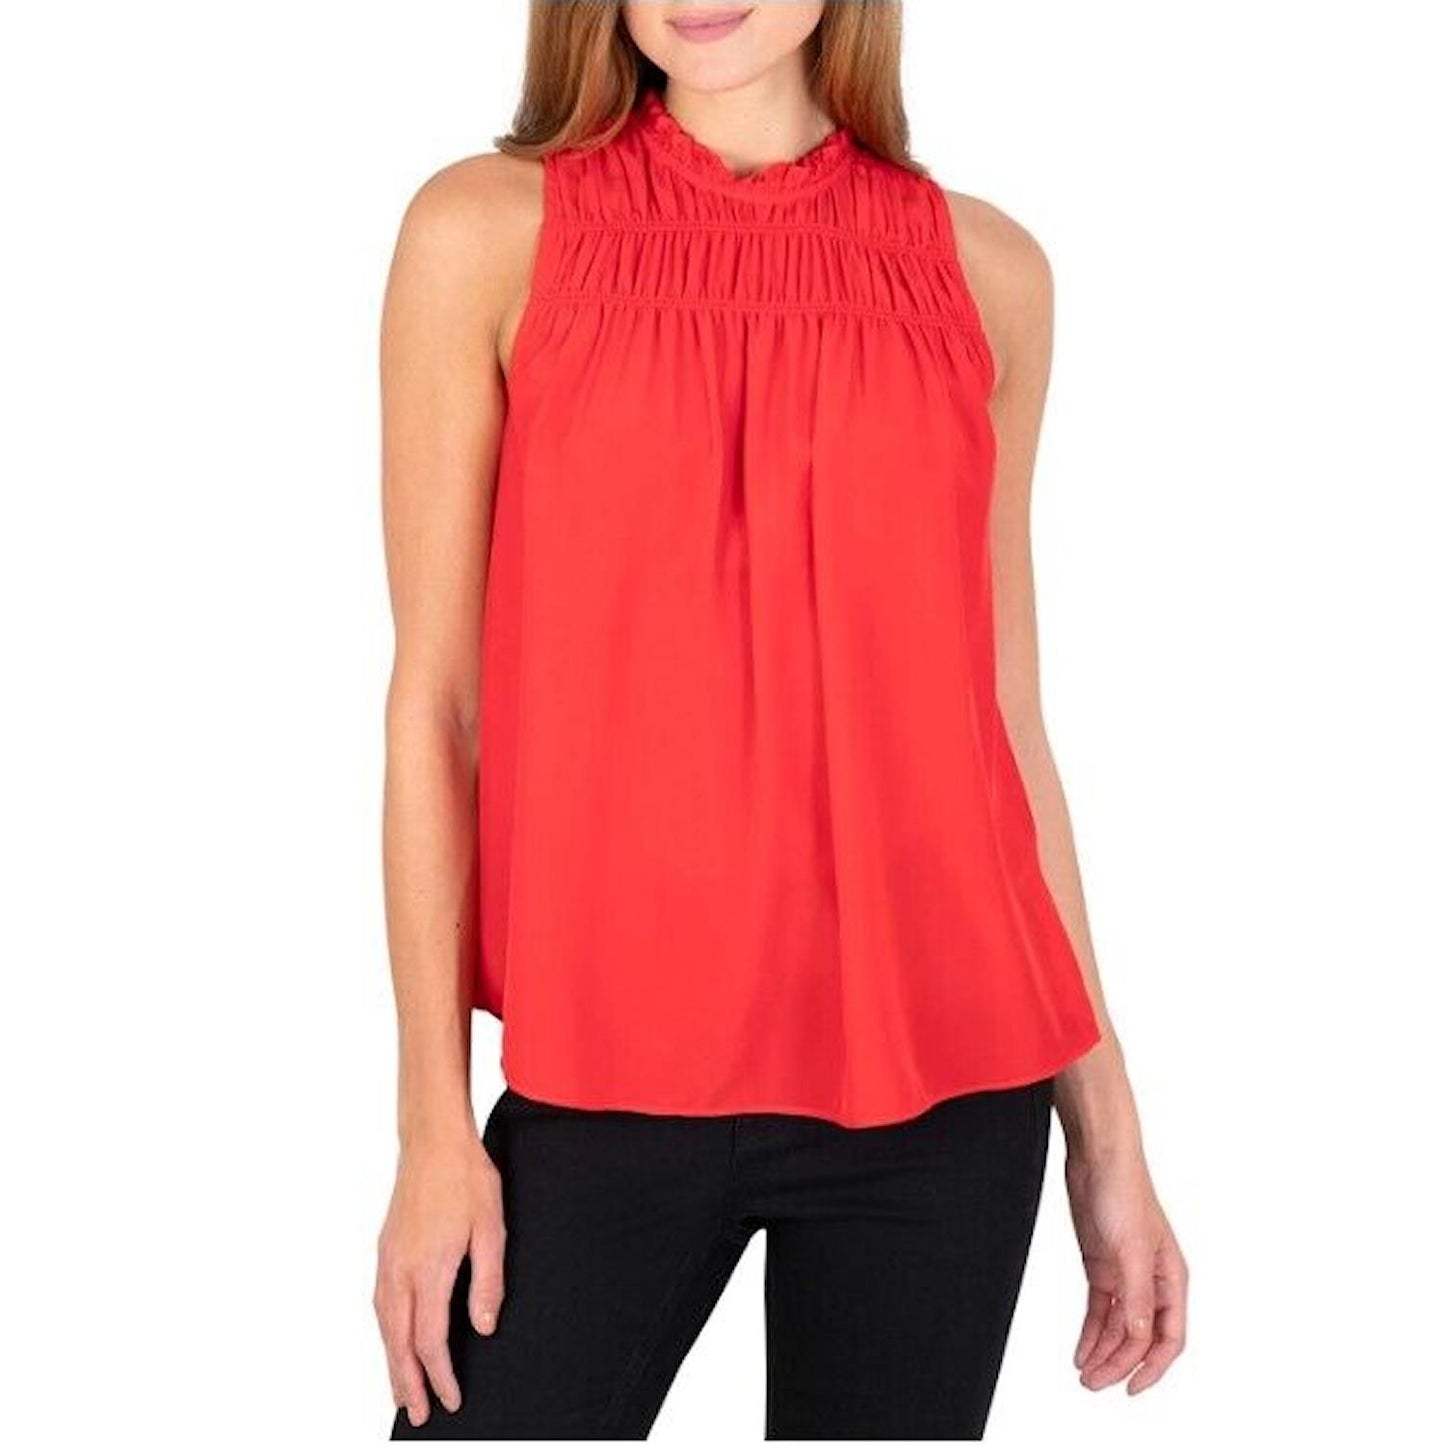 Joie Women's Limited Edition Ruffle High Neck Sleeveless Blouse Top